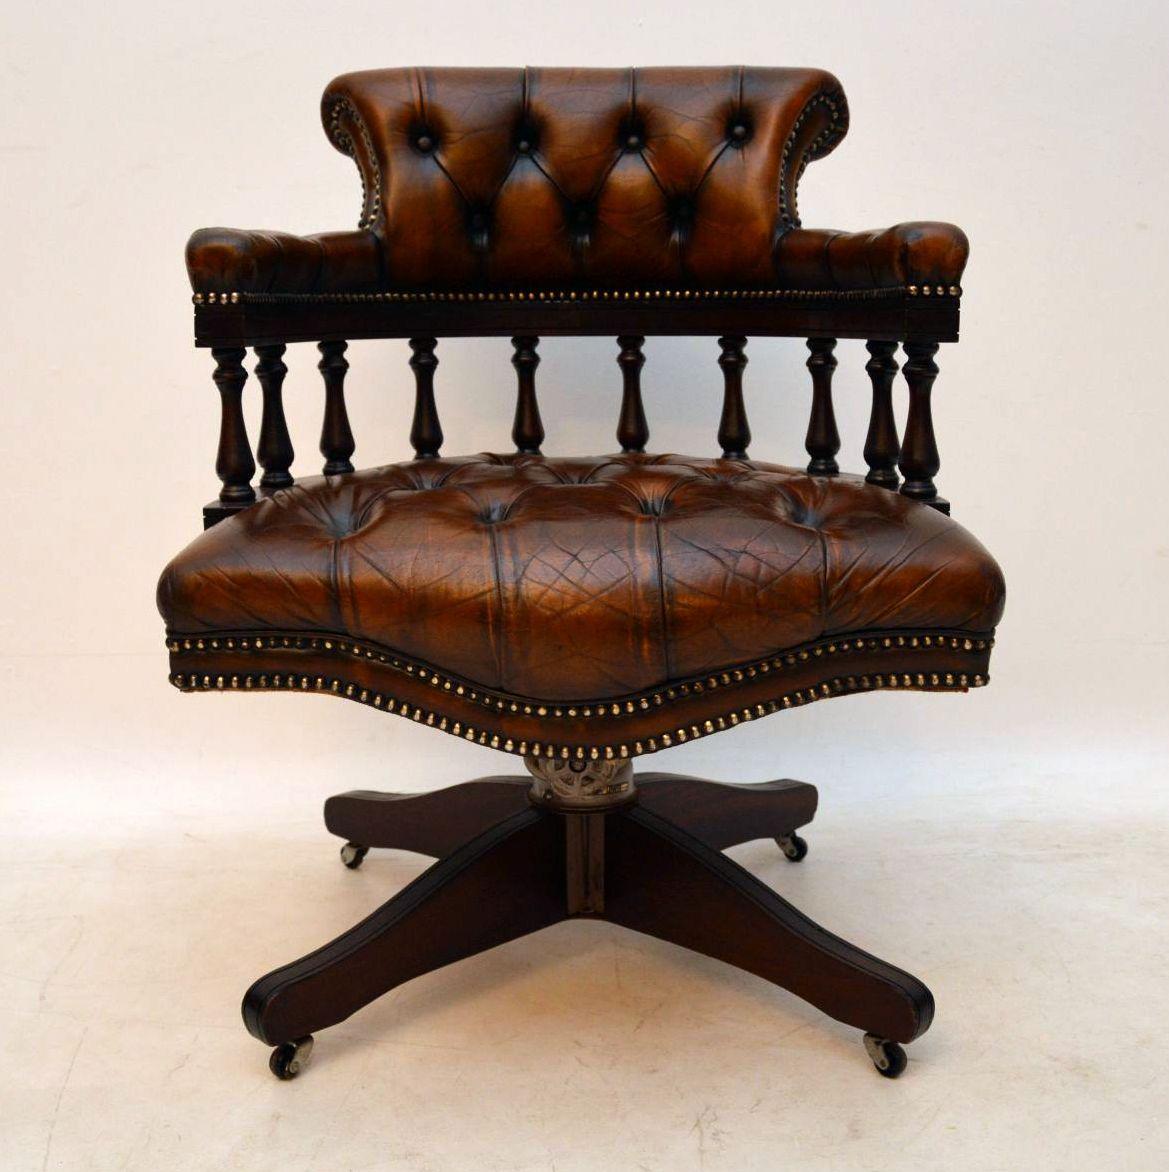 Antique deep buttoned leather swivel desk armchair in good original condition. The leather is all original, with no splits, holes or tears and is naturally distressed, so full of character. The frame is mahogany as are the legs, which sit on